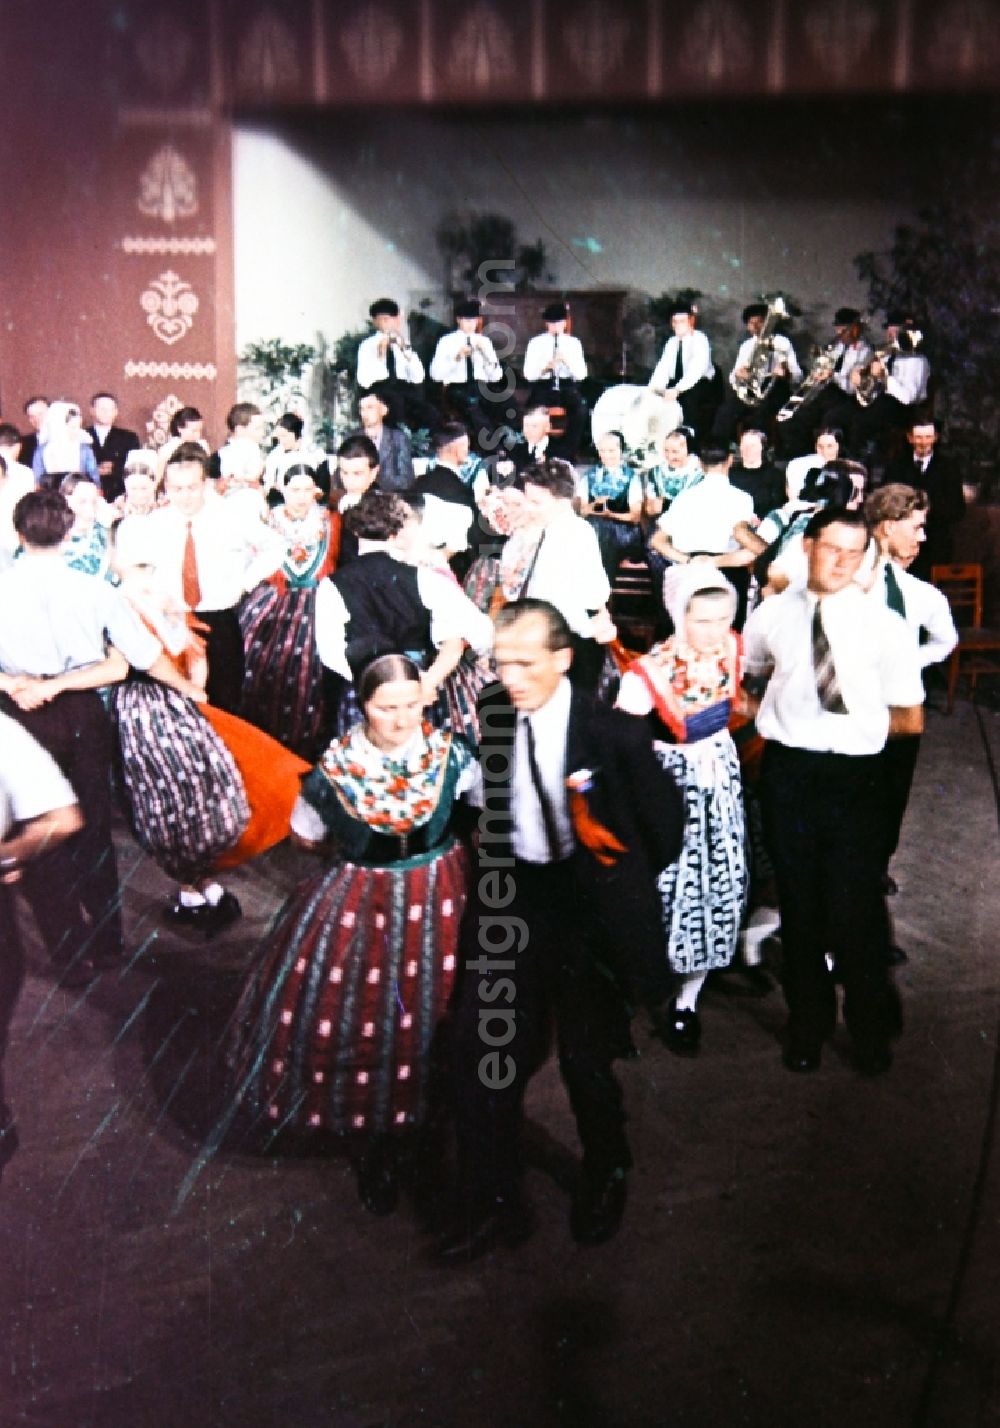 GDR photo archive: Milkel - Wedding sorbian inhabitants in Milkel in the state Saxony on the territory of the former GDR, German Democratic Republic